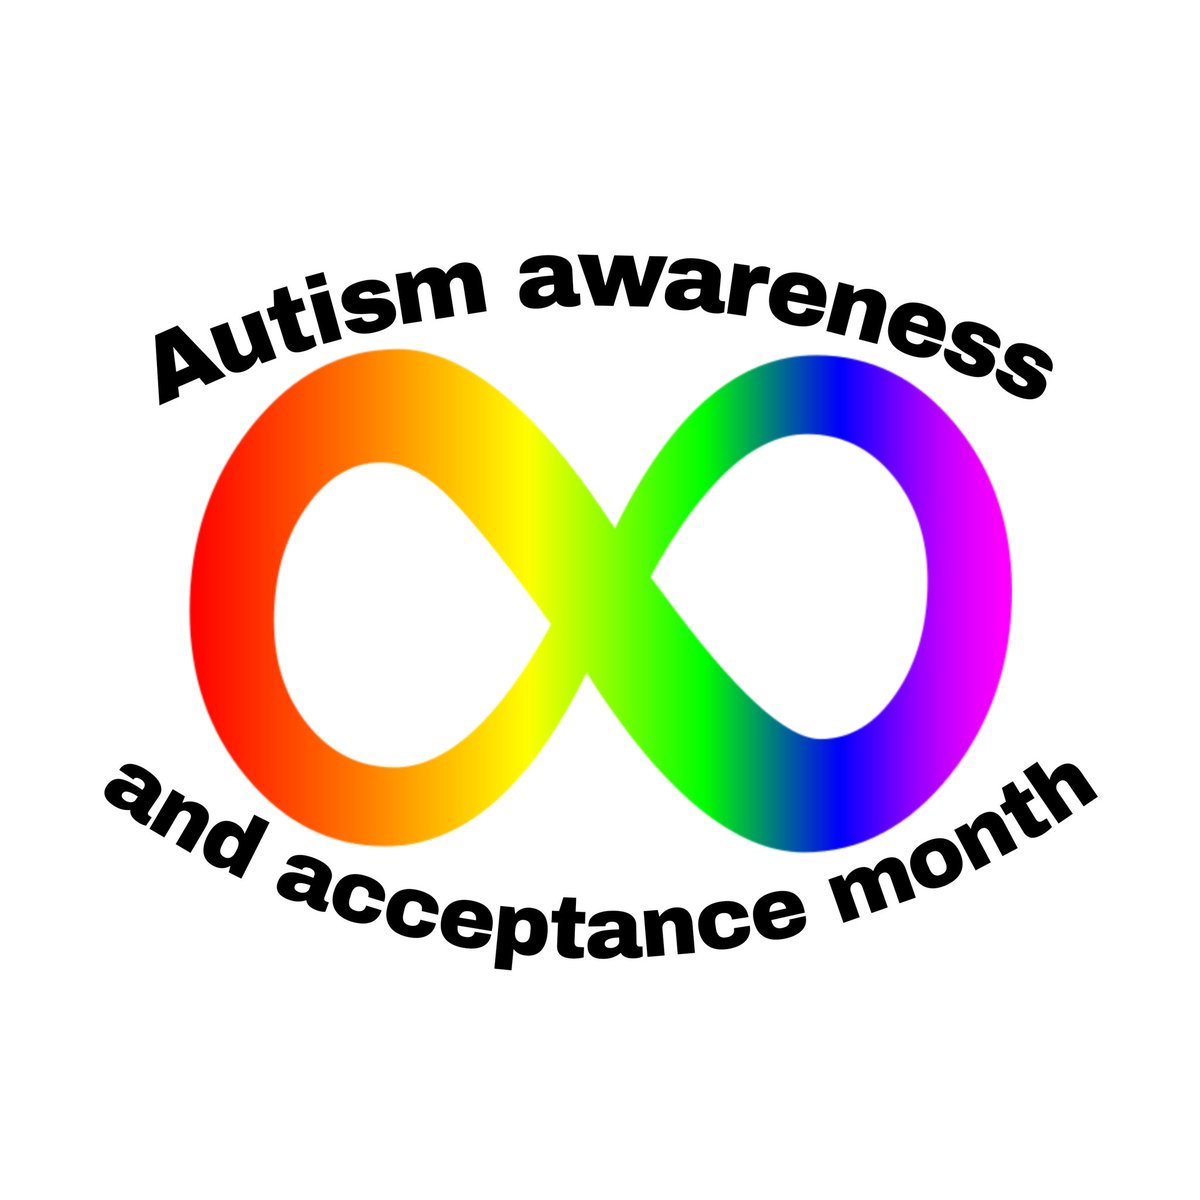  #fanderdisabilityblackout #fanderdisabilitypositivityThe month of April is Autism Awareness/Acceptance month, so I decided to take some time to research into autism whilst being careful to avoid topics that  @ThomasSanders is already aware of1/17